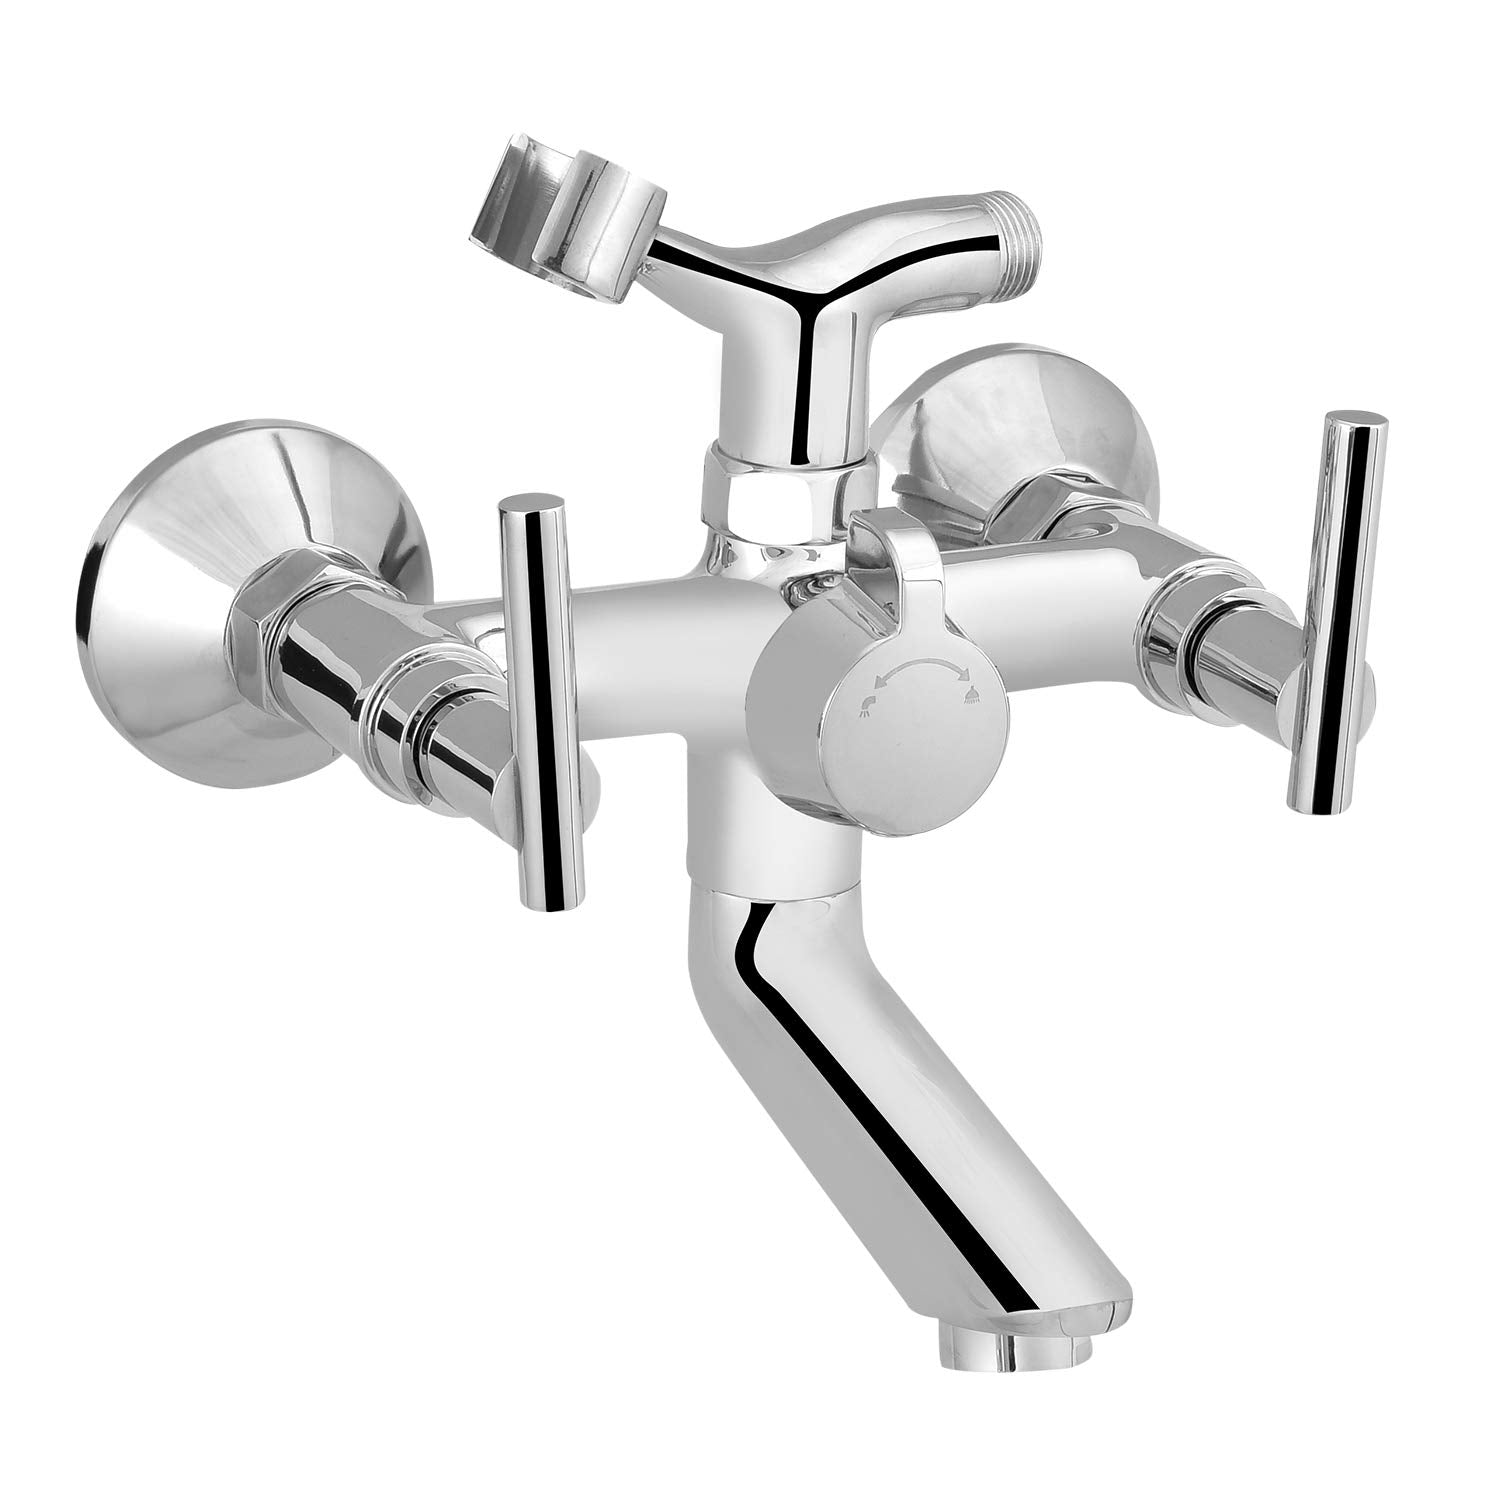 Parryware G0619A1 Agate (Quarter Turn Range) Wall Mixer with Crutch